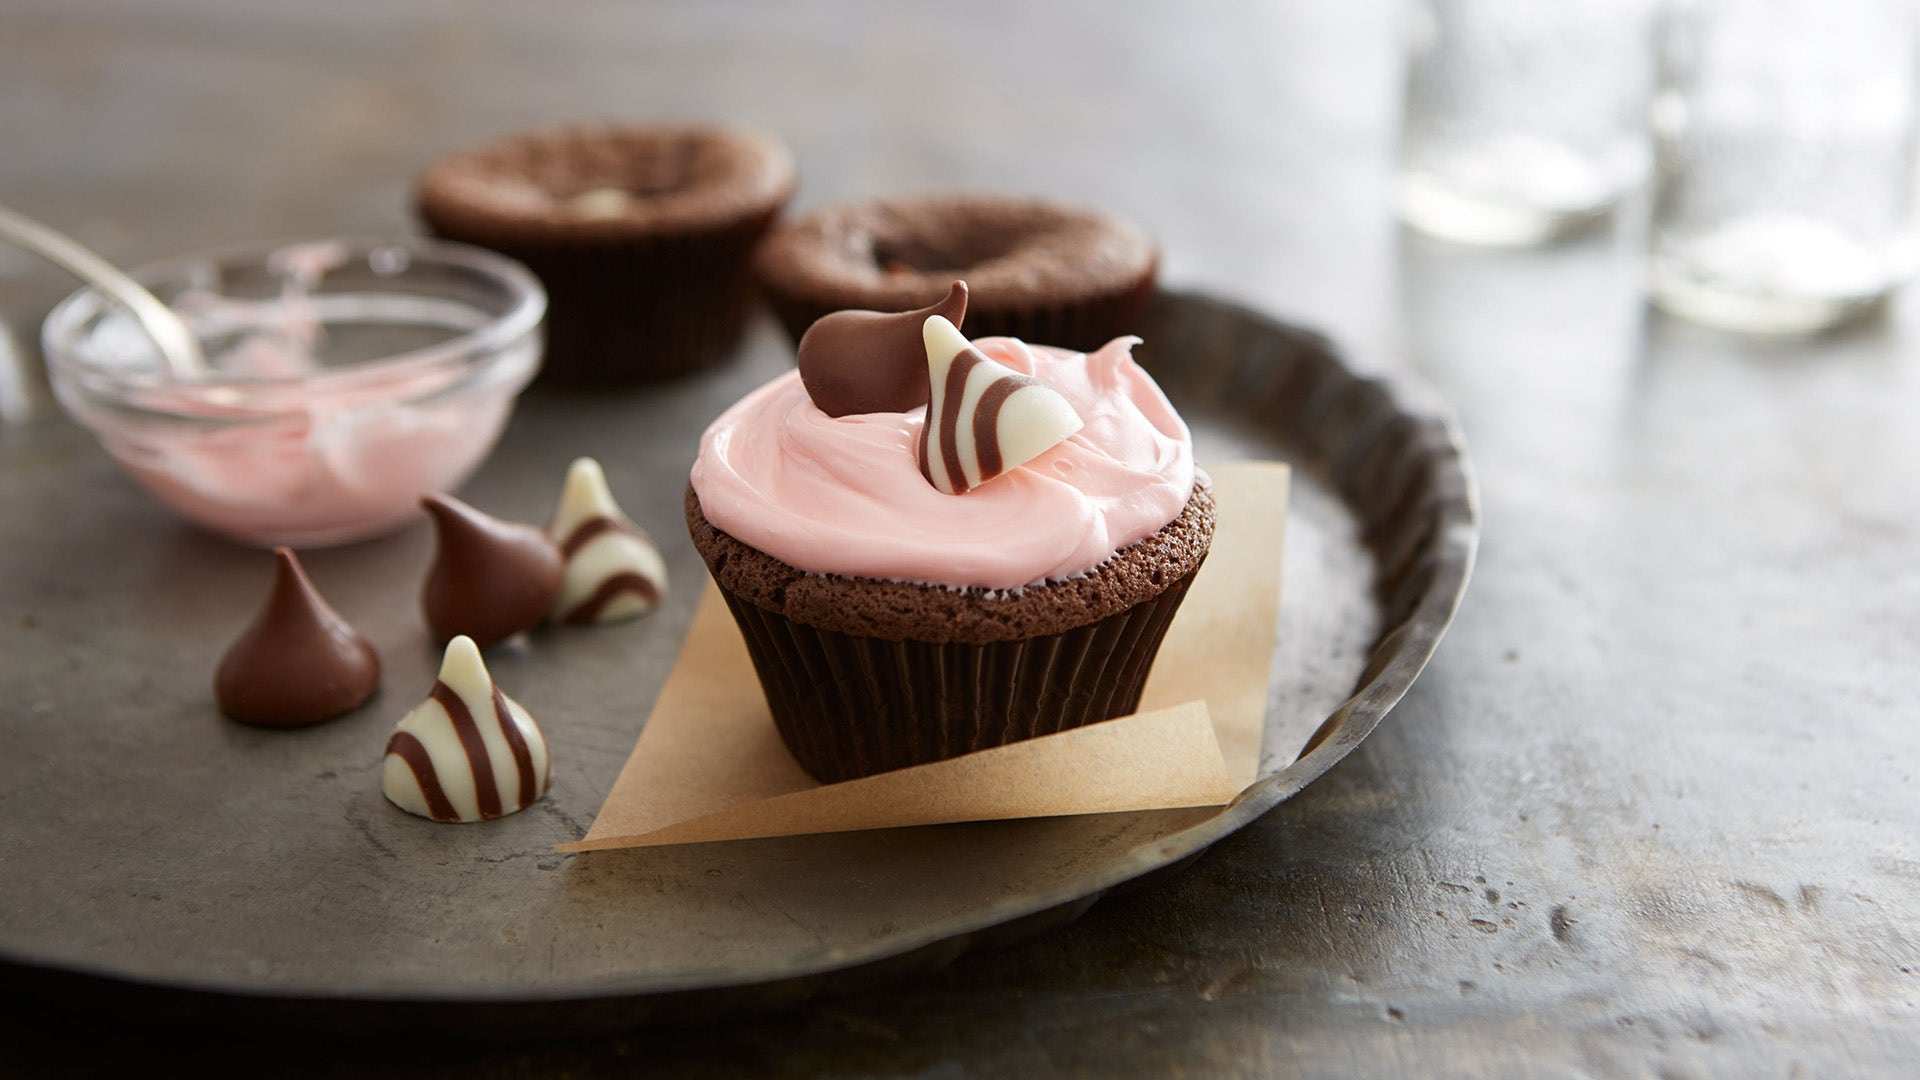 Secret Admirer HERSHEY'S HUGS and KISSES Candy Cupcakes